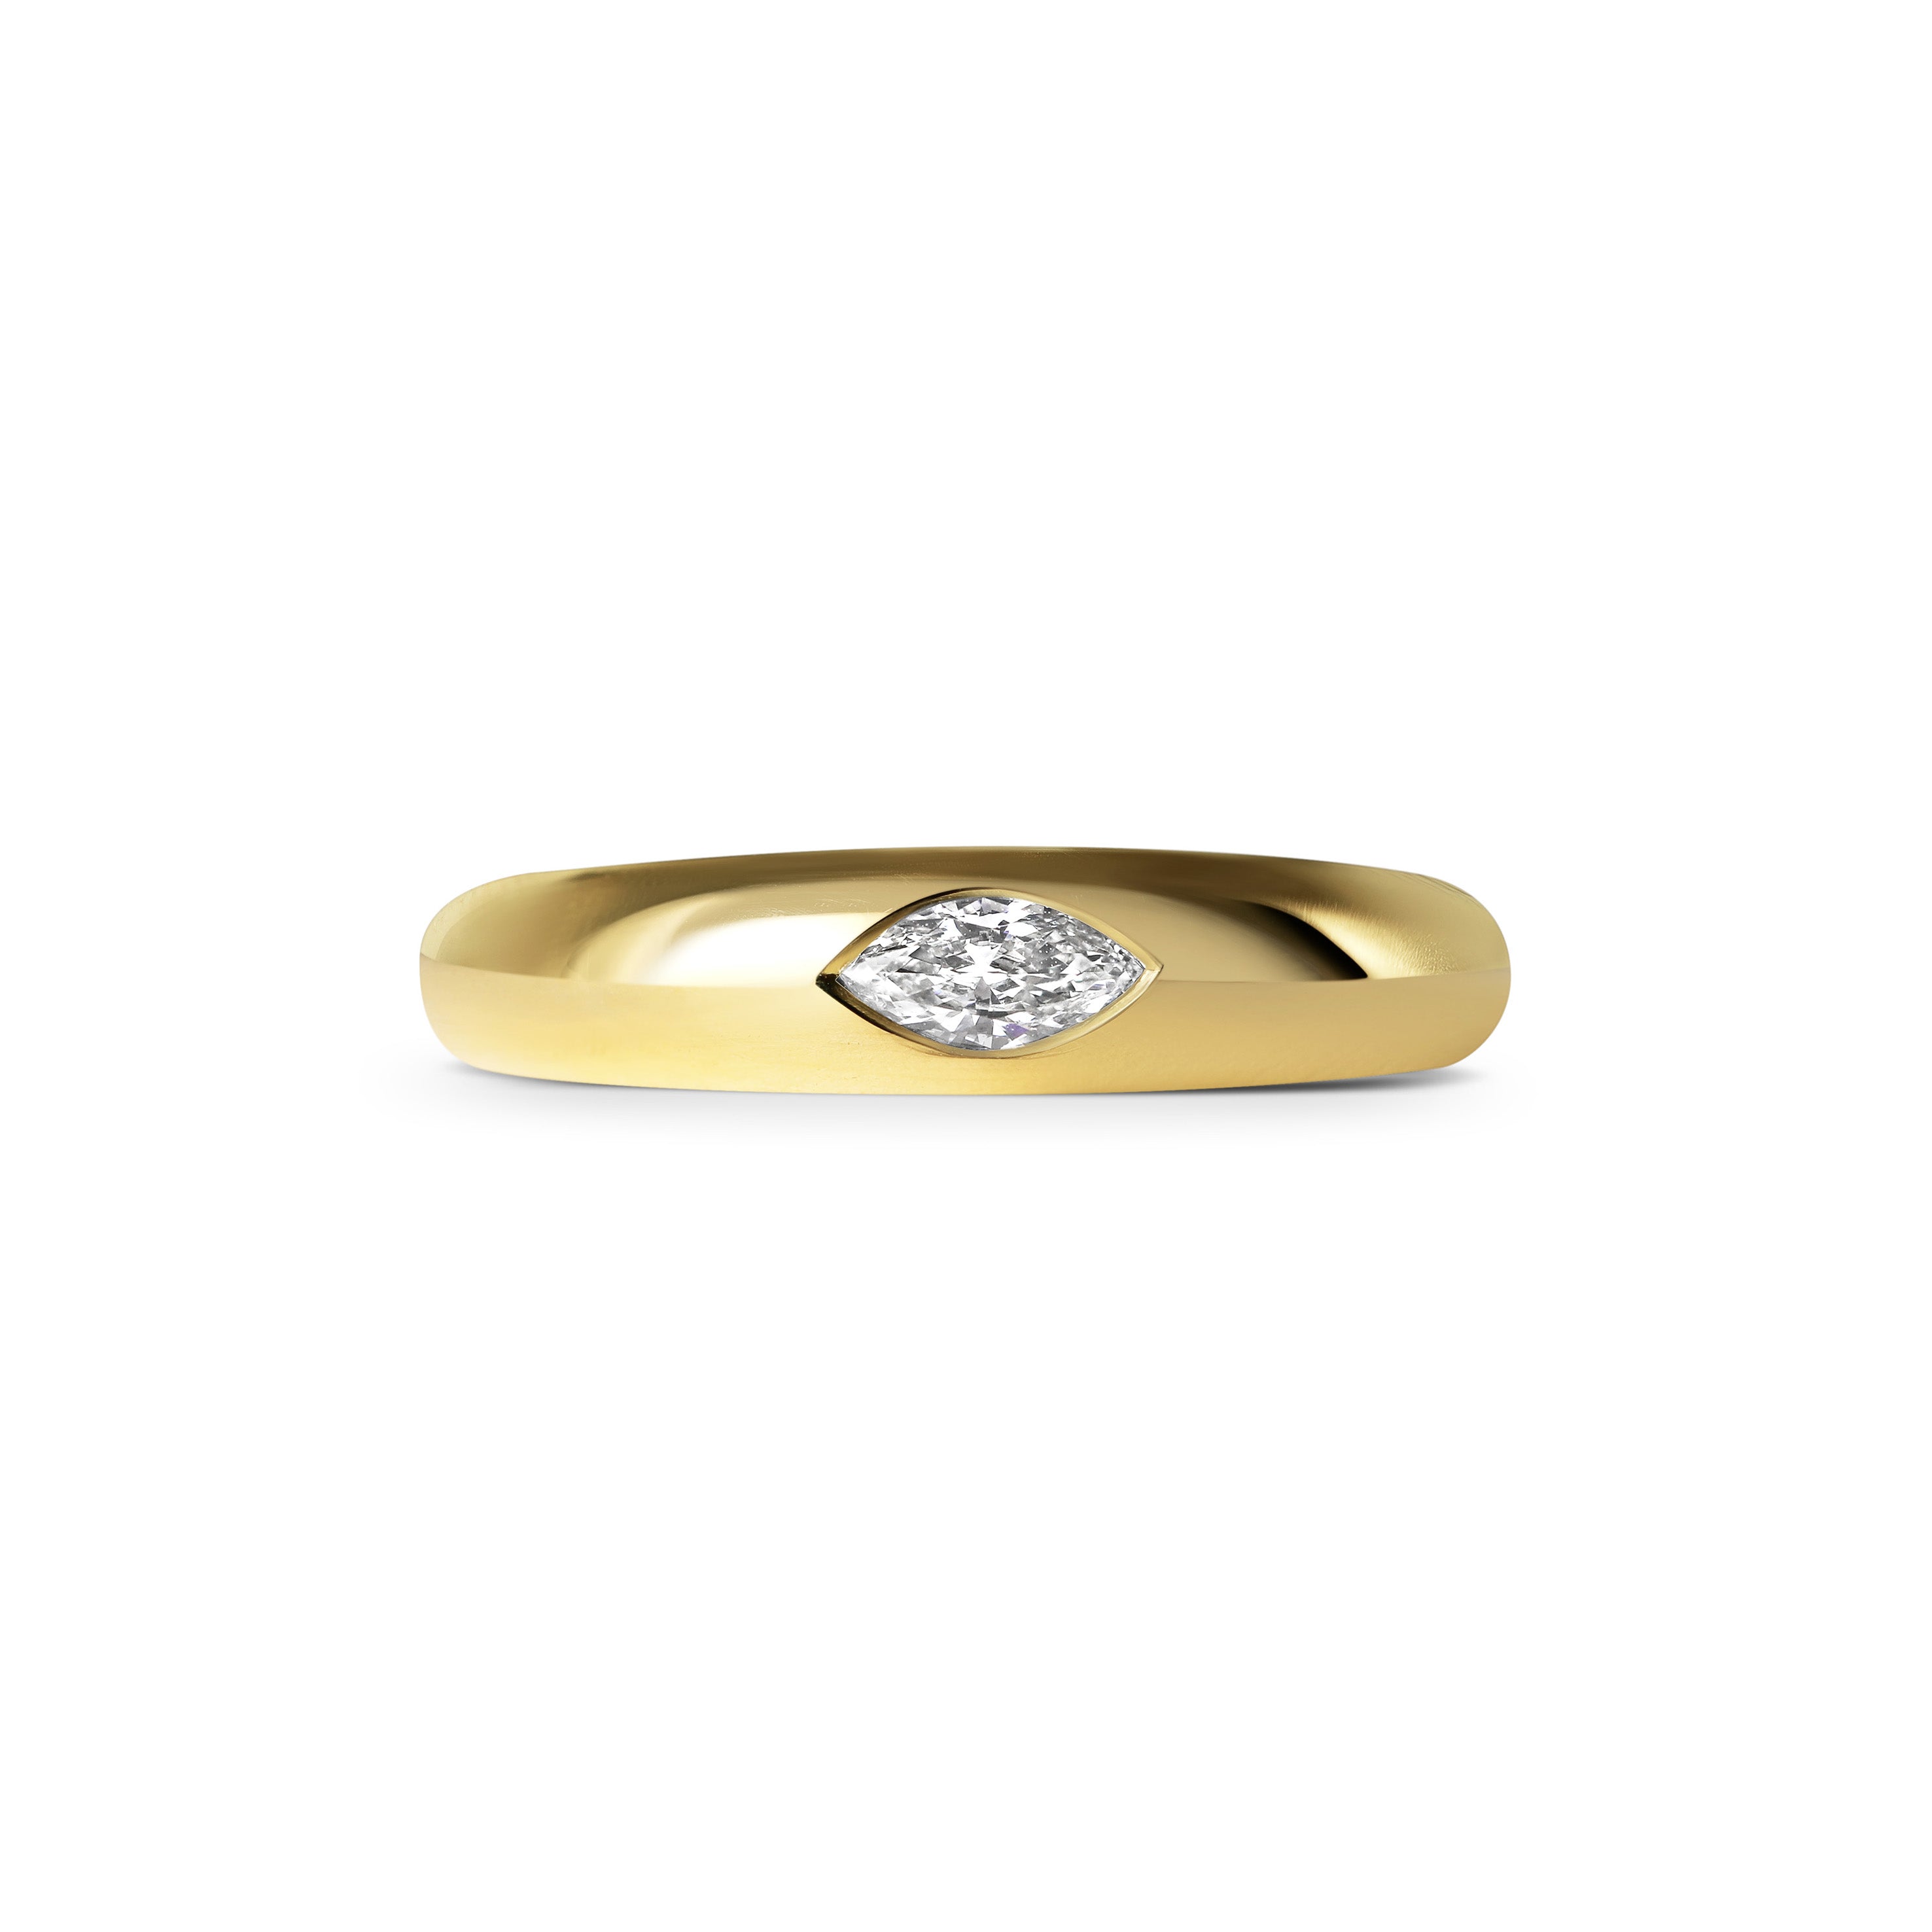 The Mini Marquise Signet Ring by East London jeweller Rachel Boston | Discover our collections of unique and timeless engagement rings, wedding rings, and modern fine jewellery.